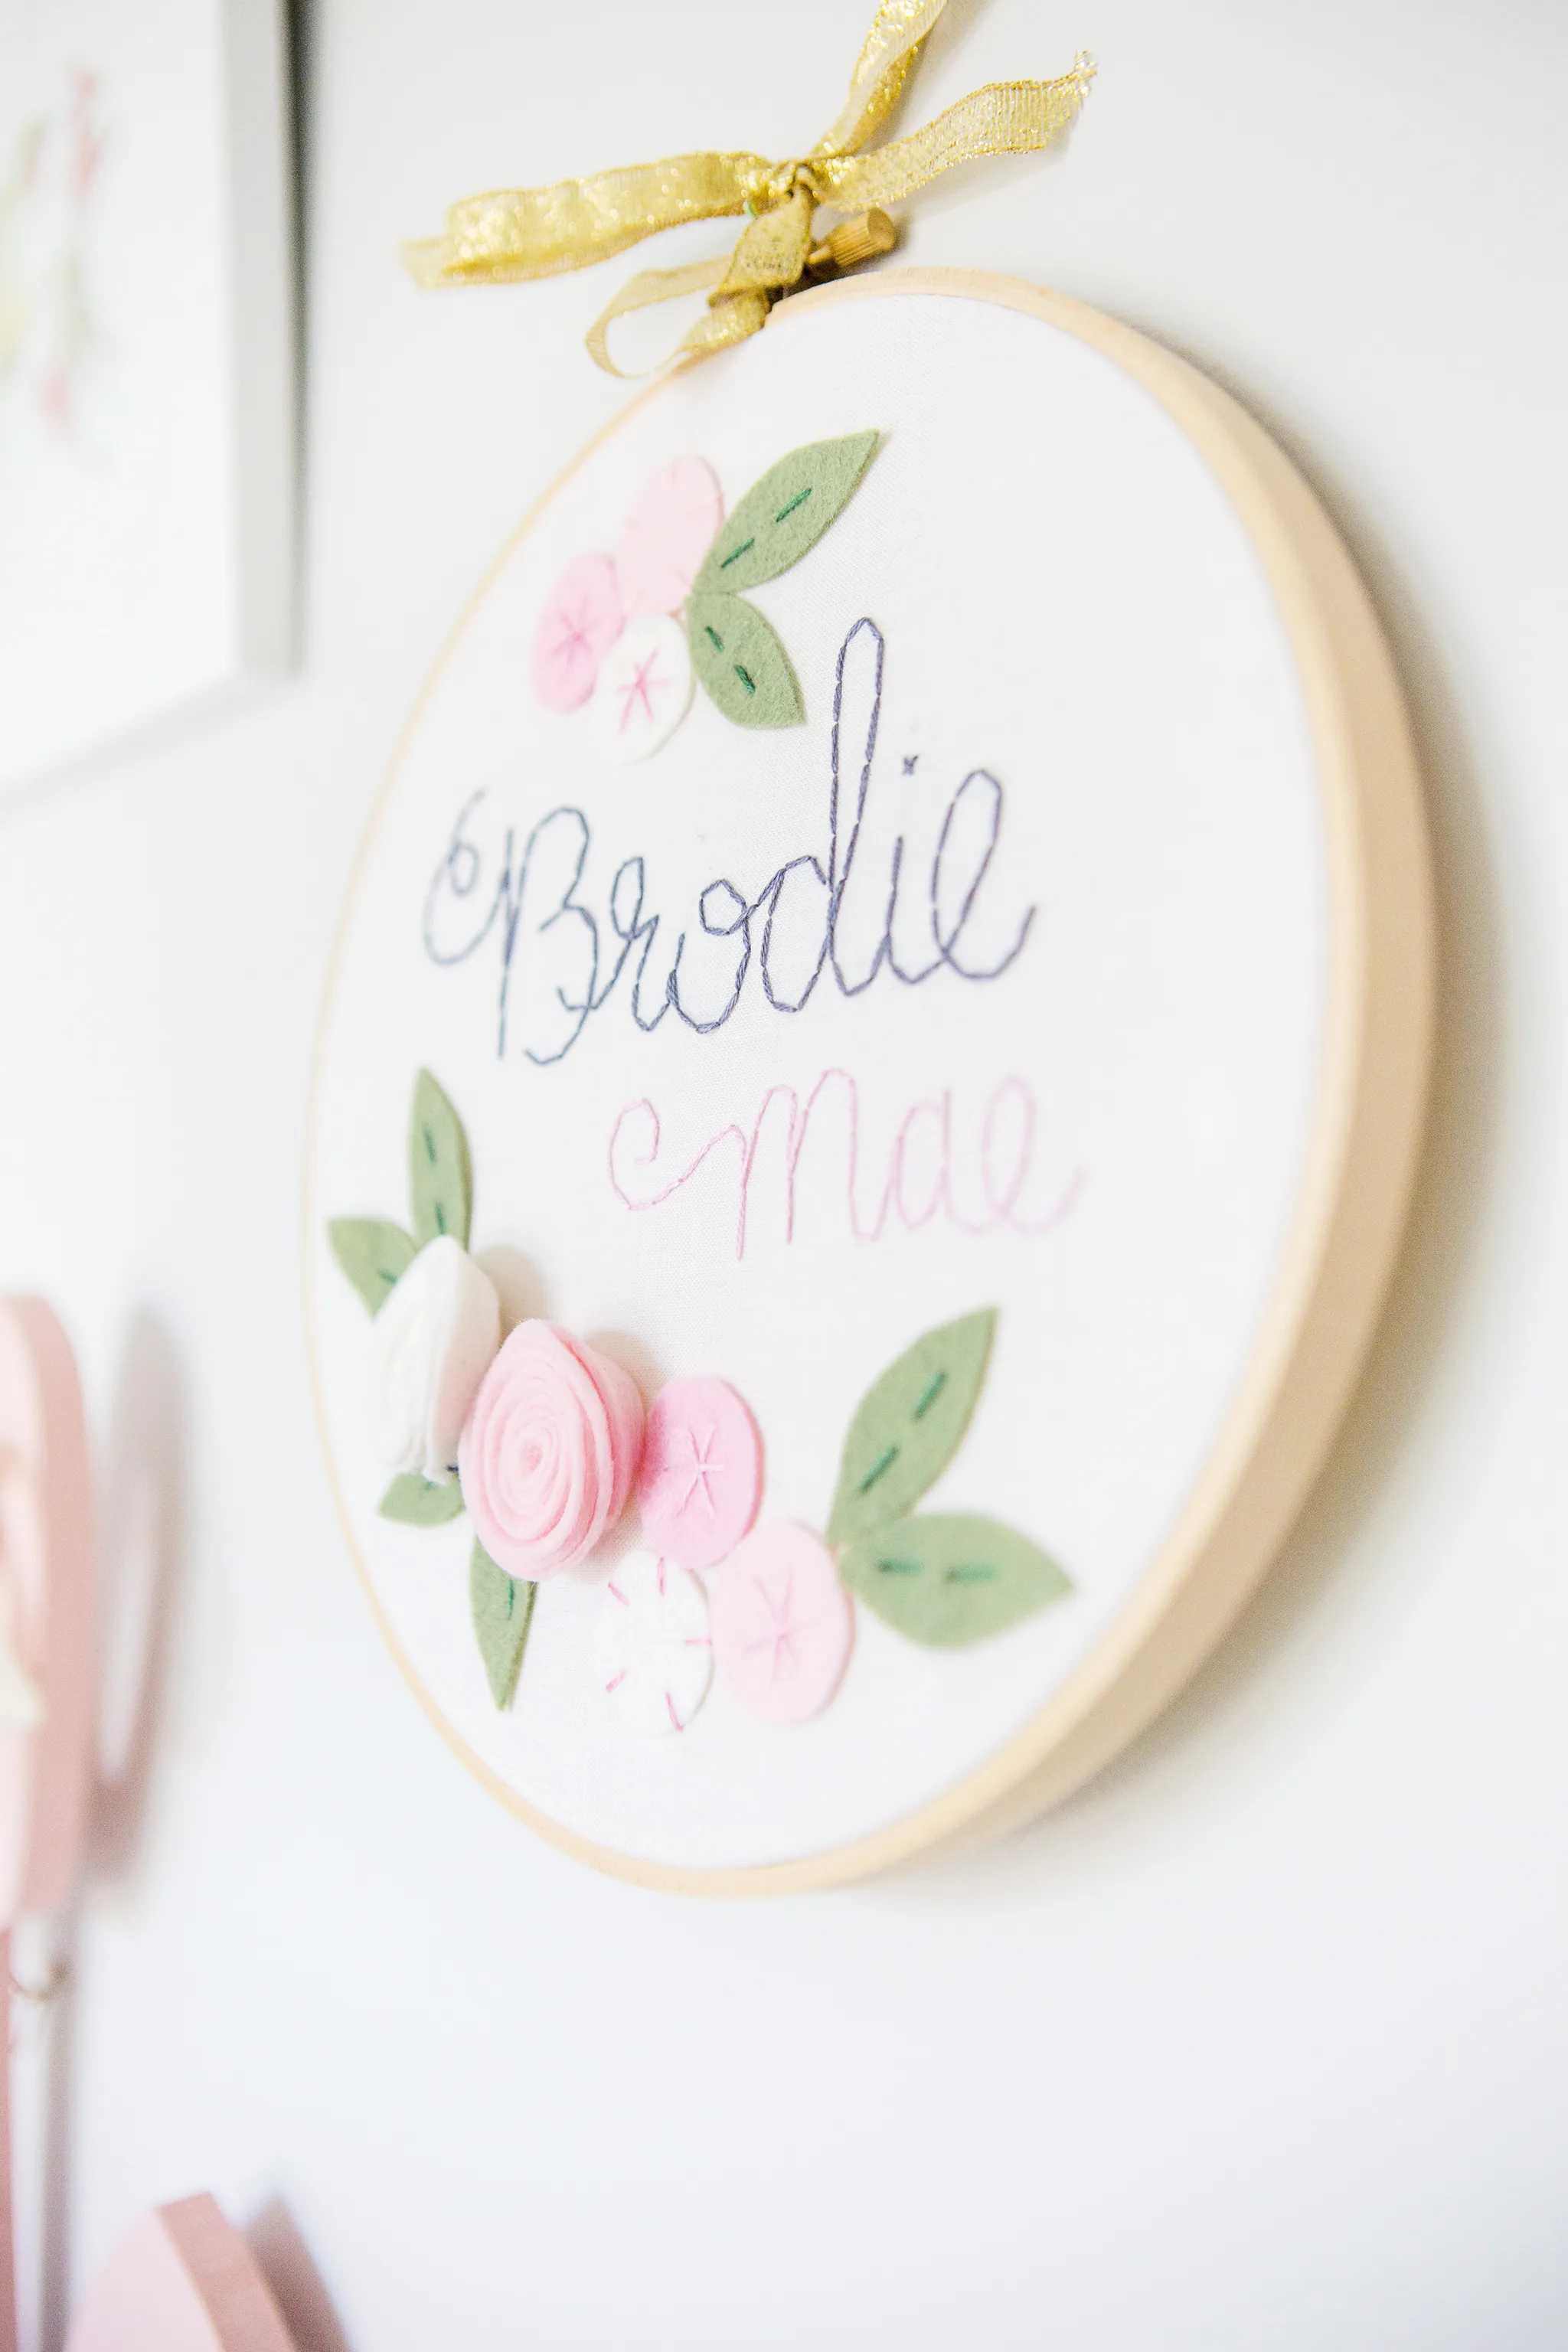 Personalized Embroidery Hoop Art